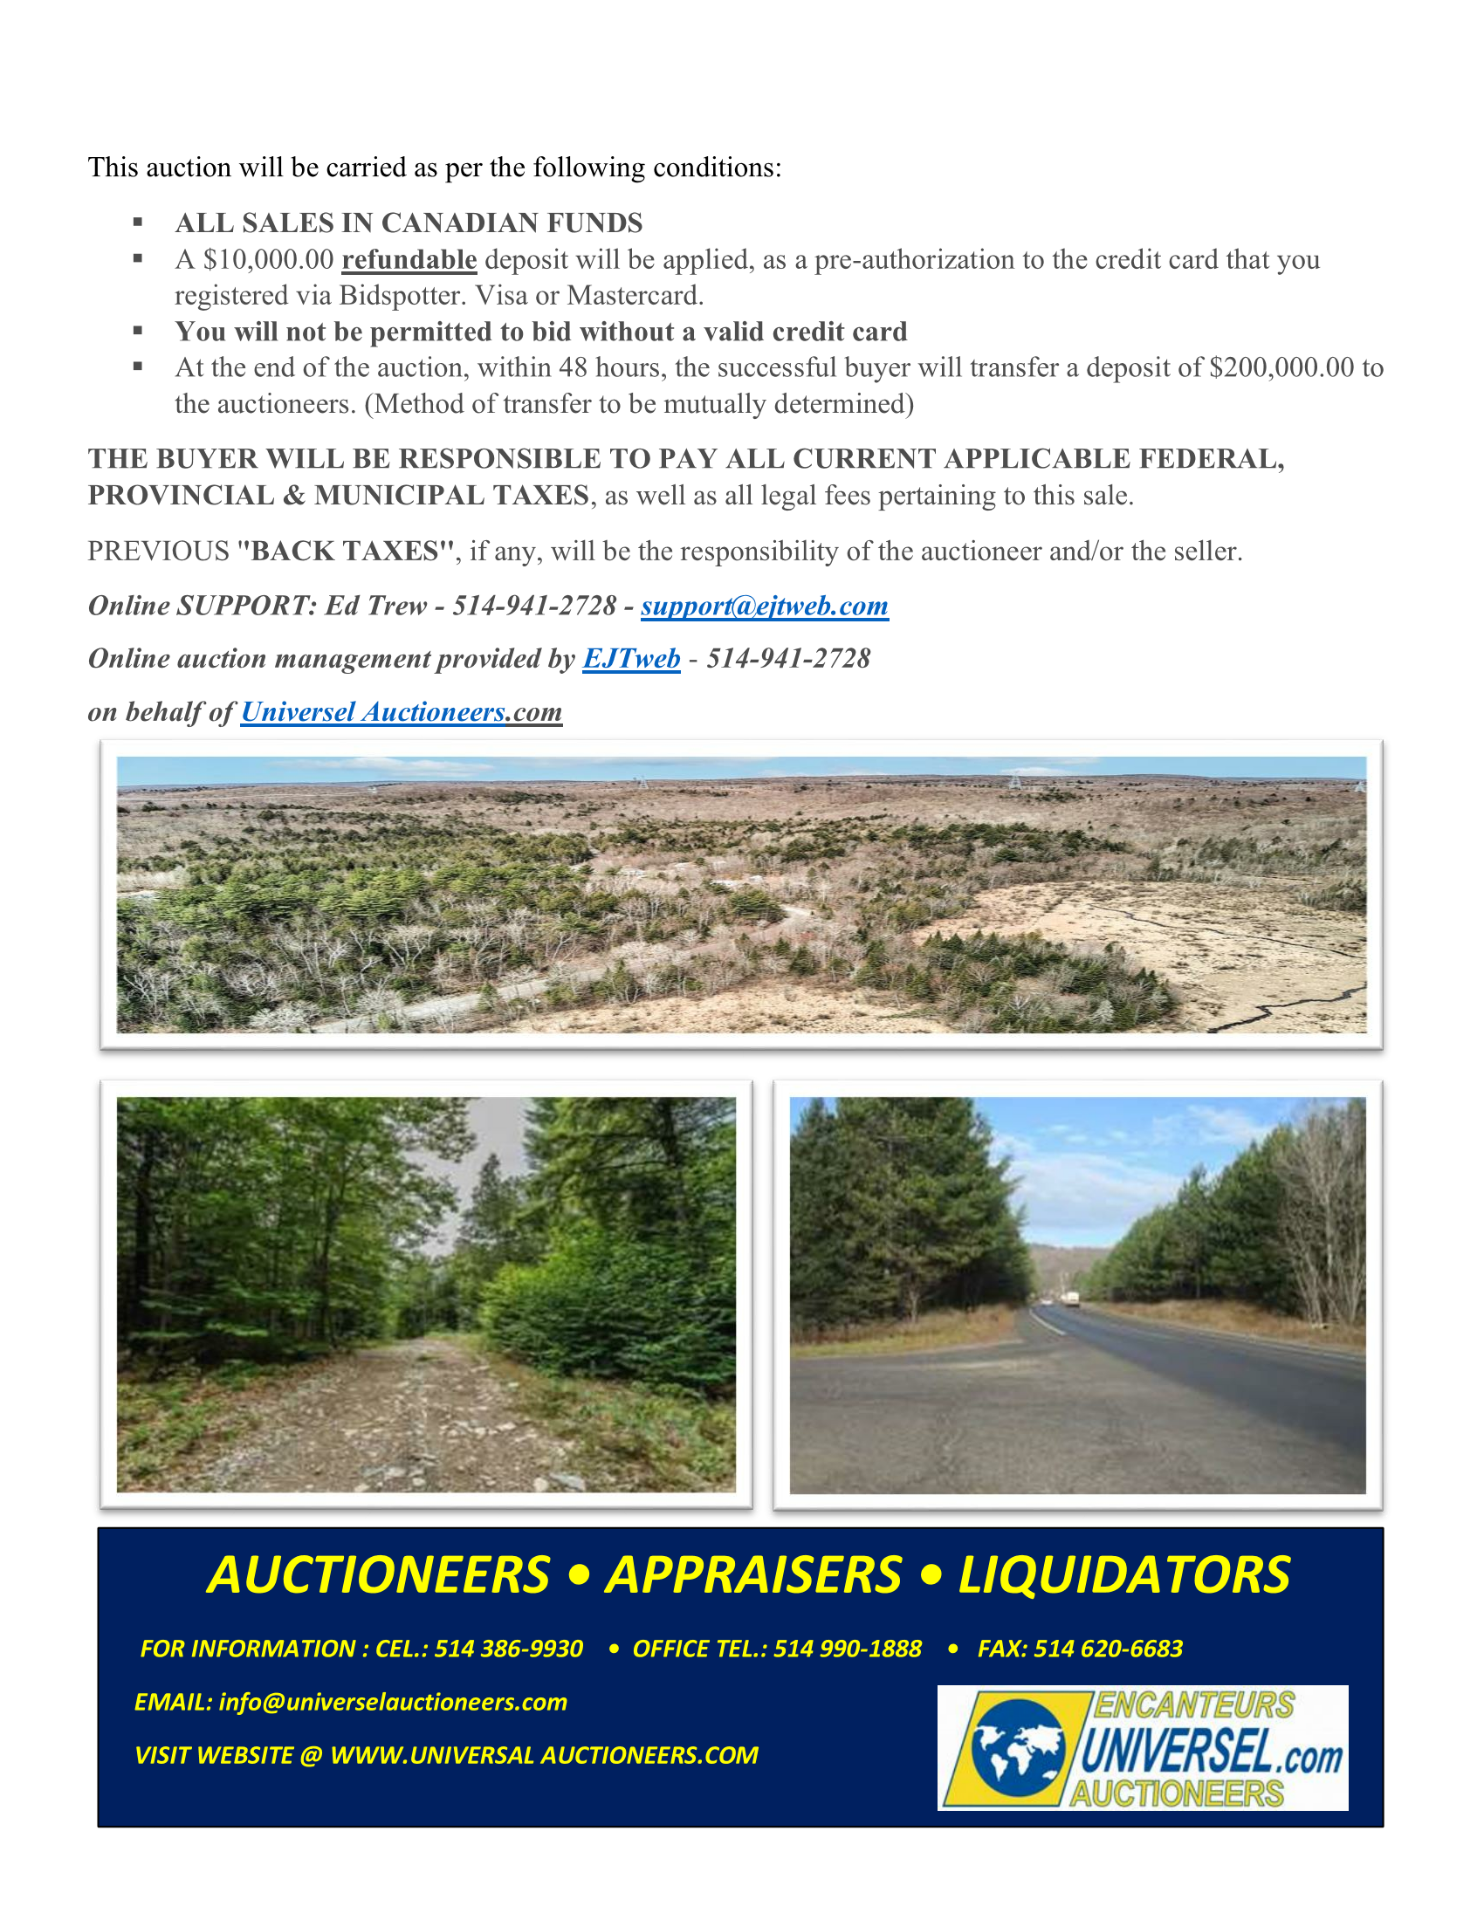 BROCHURE NOTE: FINAL SALE PRICE SUBJECT TO A $200,000 CAD DEPOSIT - Image 3 of 3